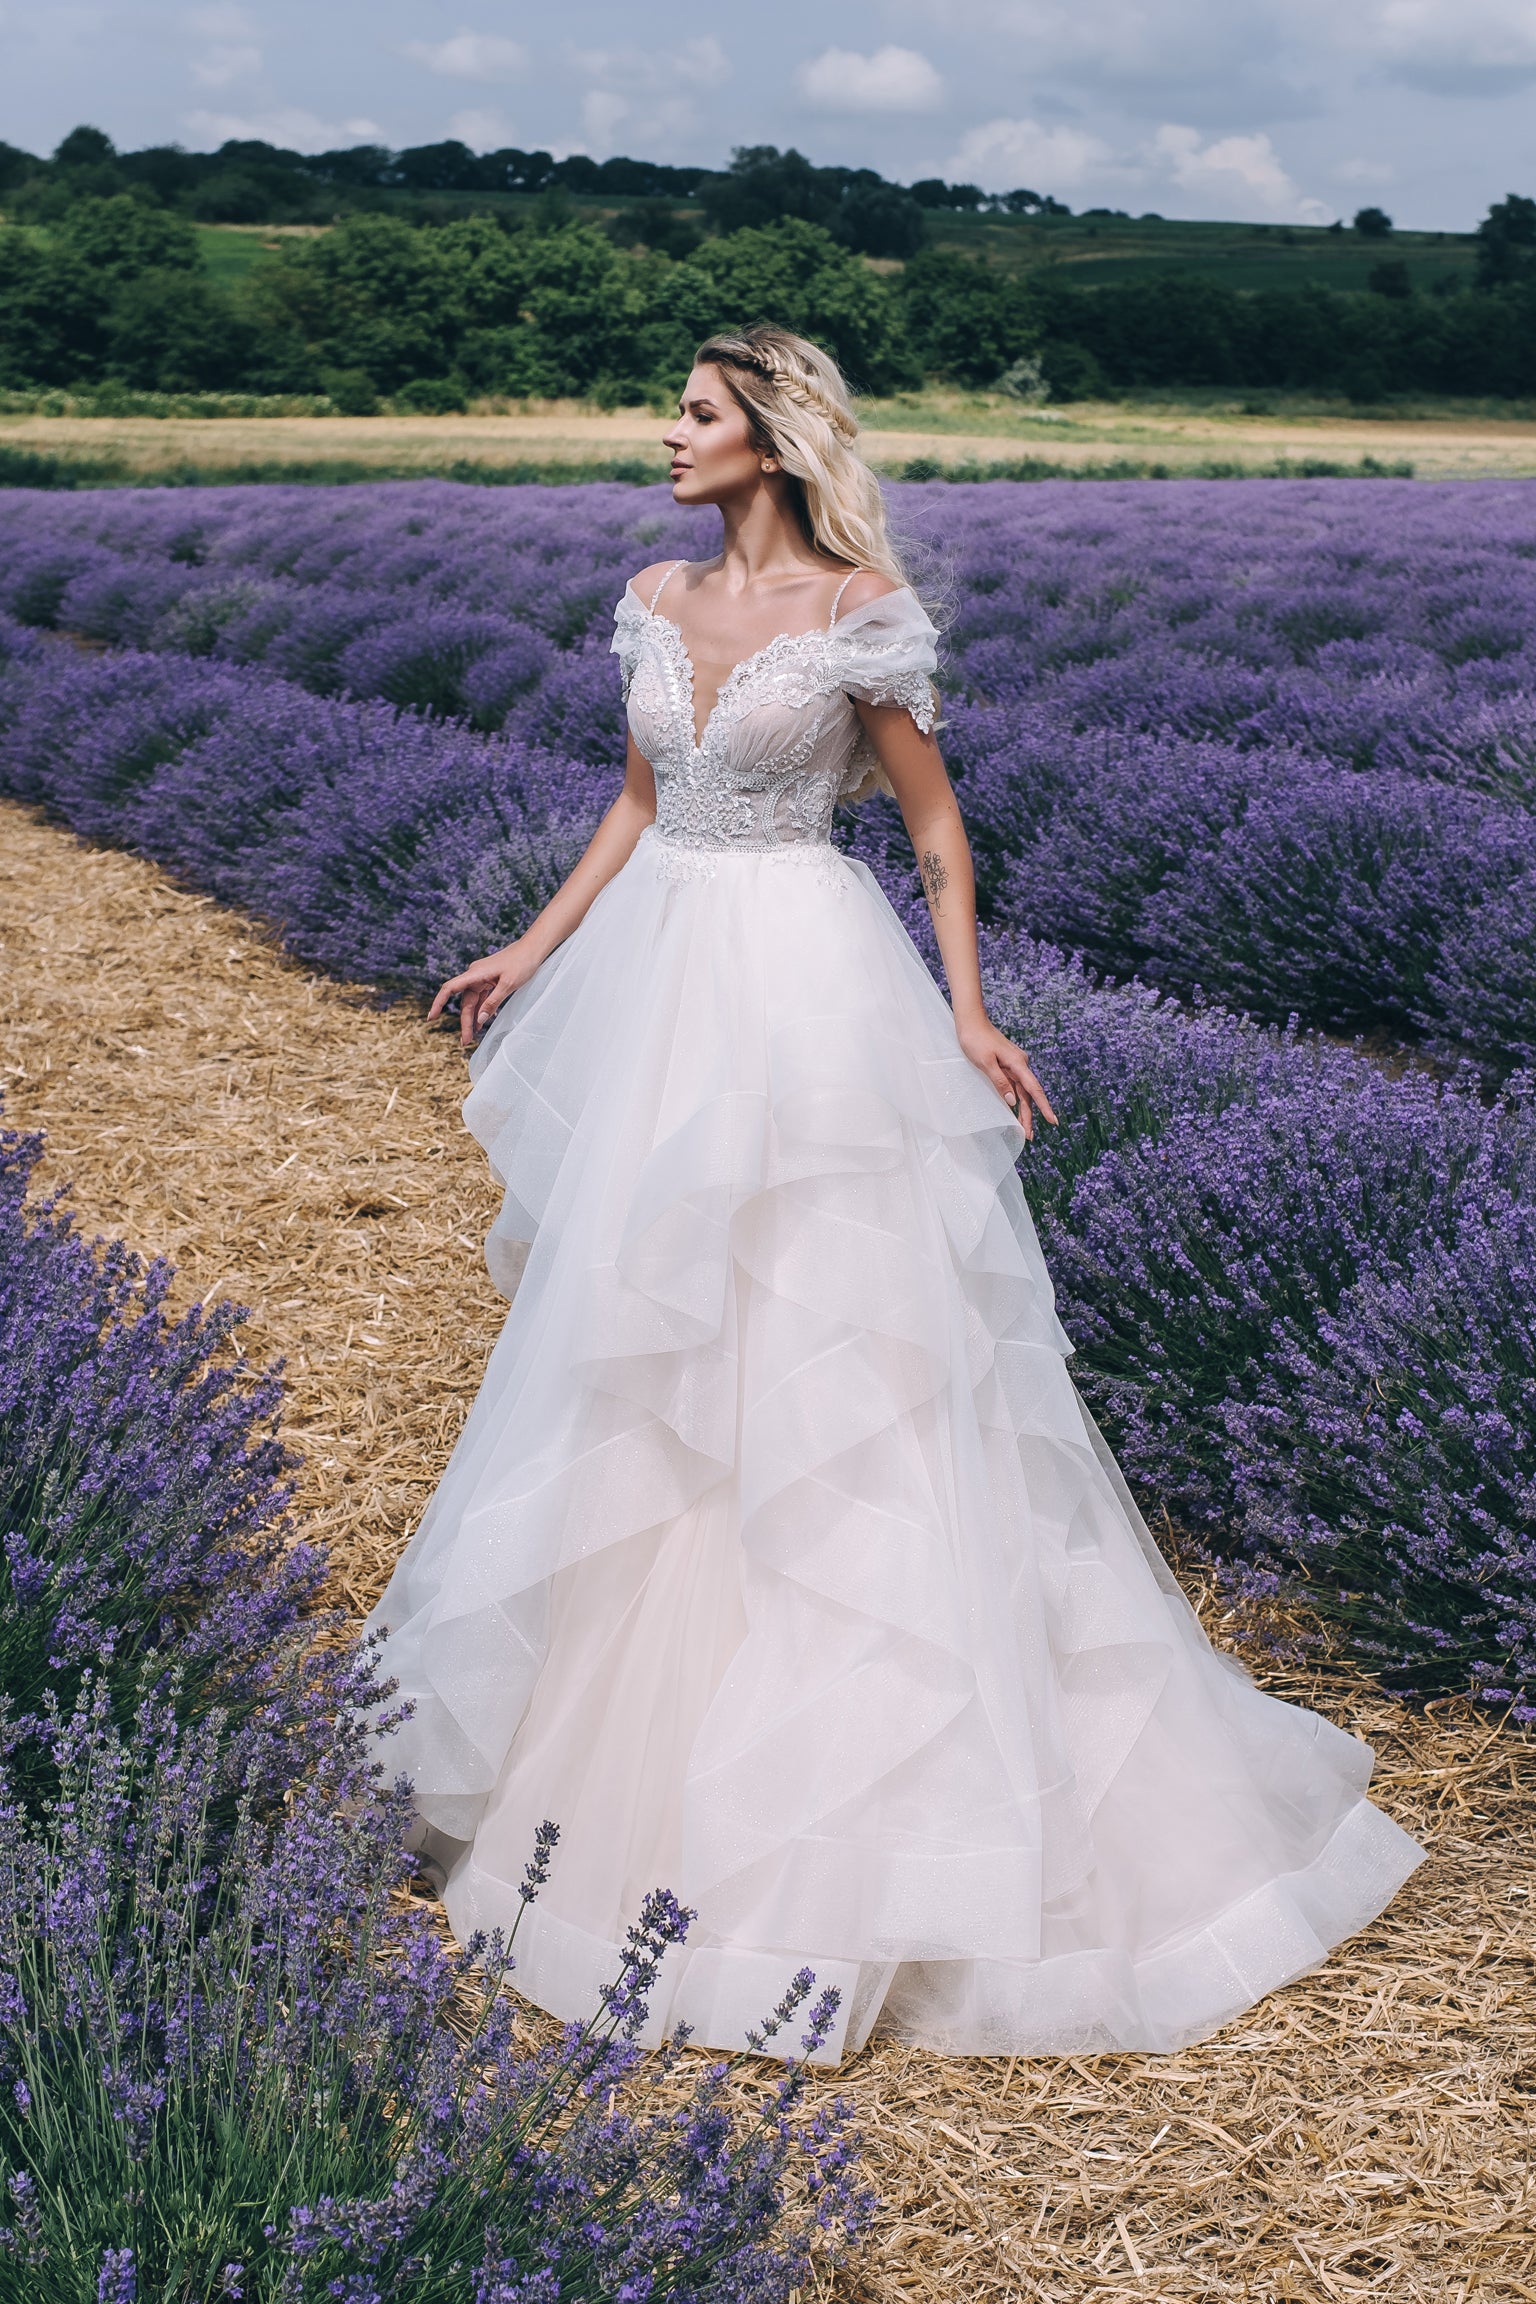 Rose - Lace and Tulle Romantic Ball Gown